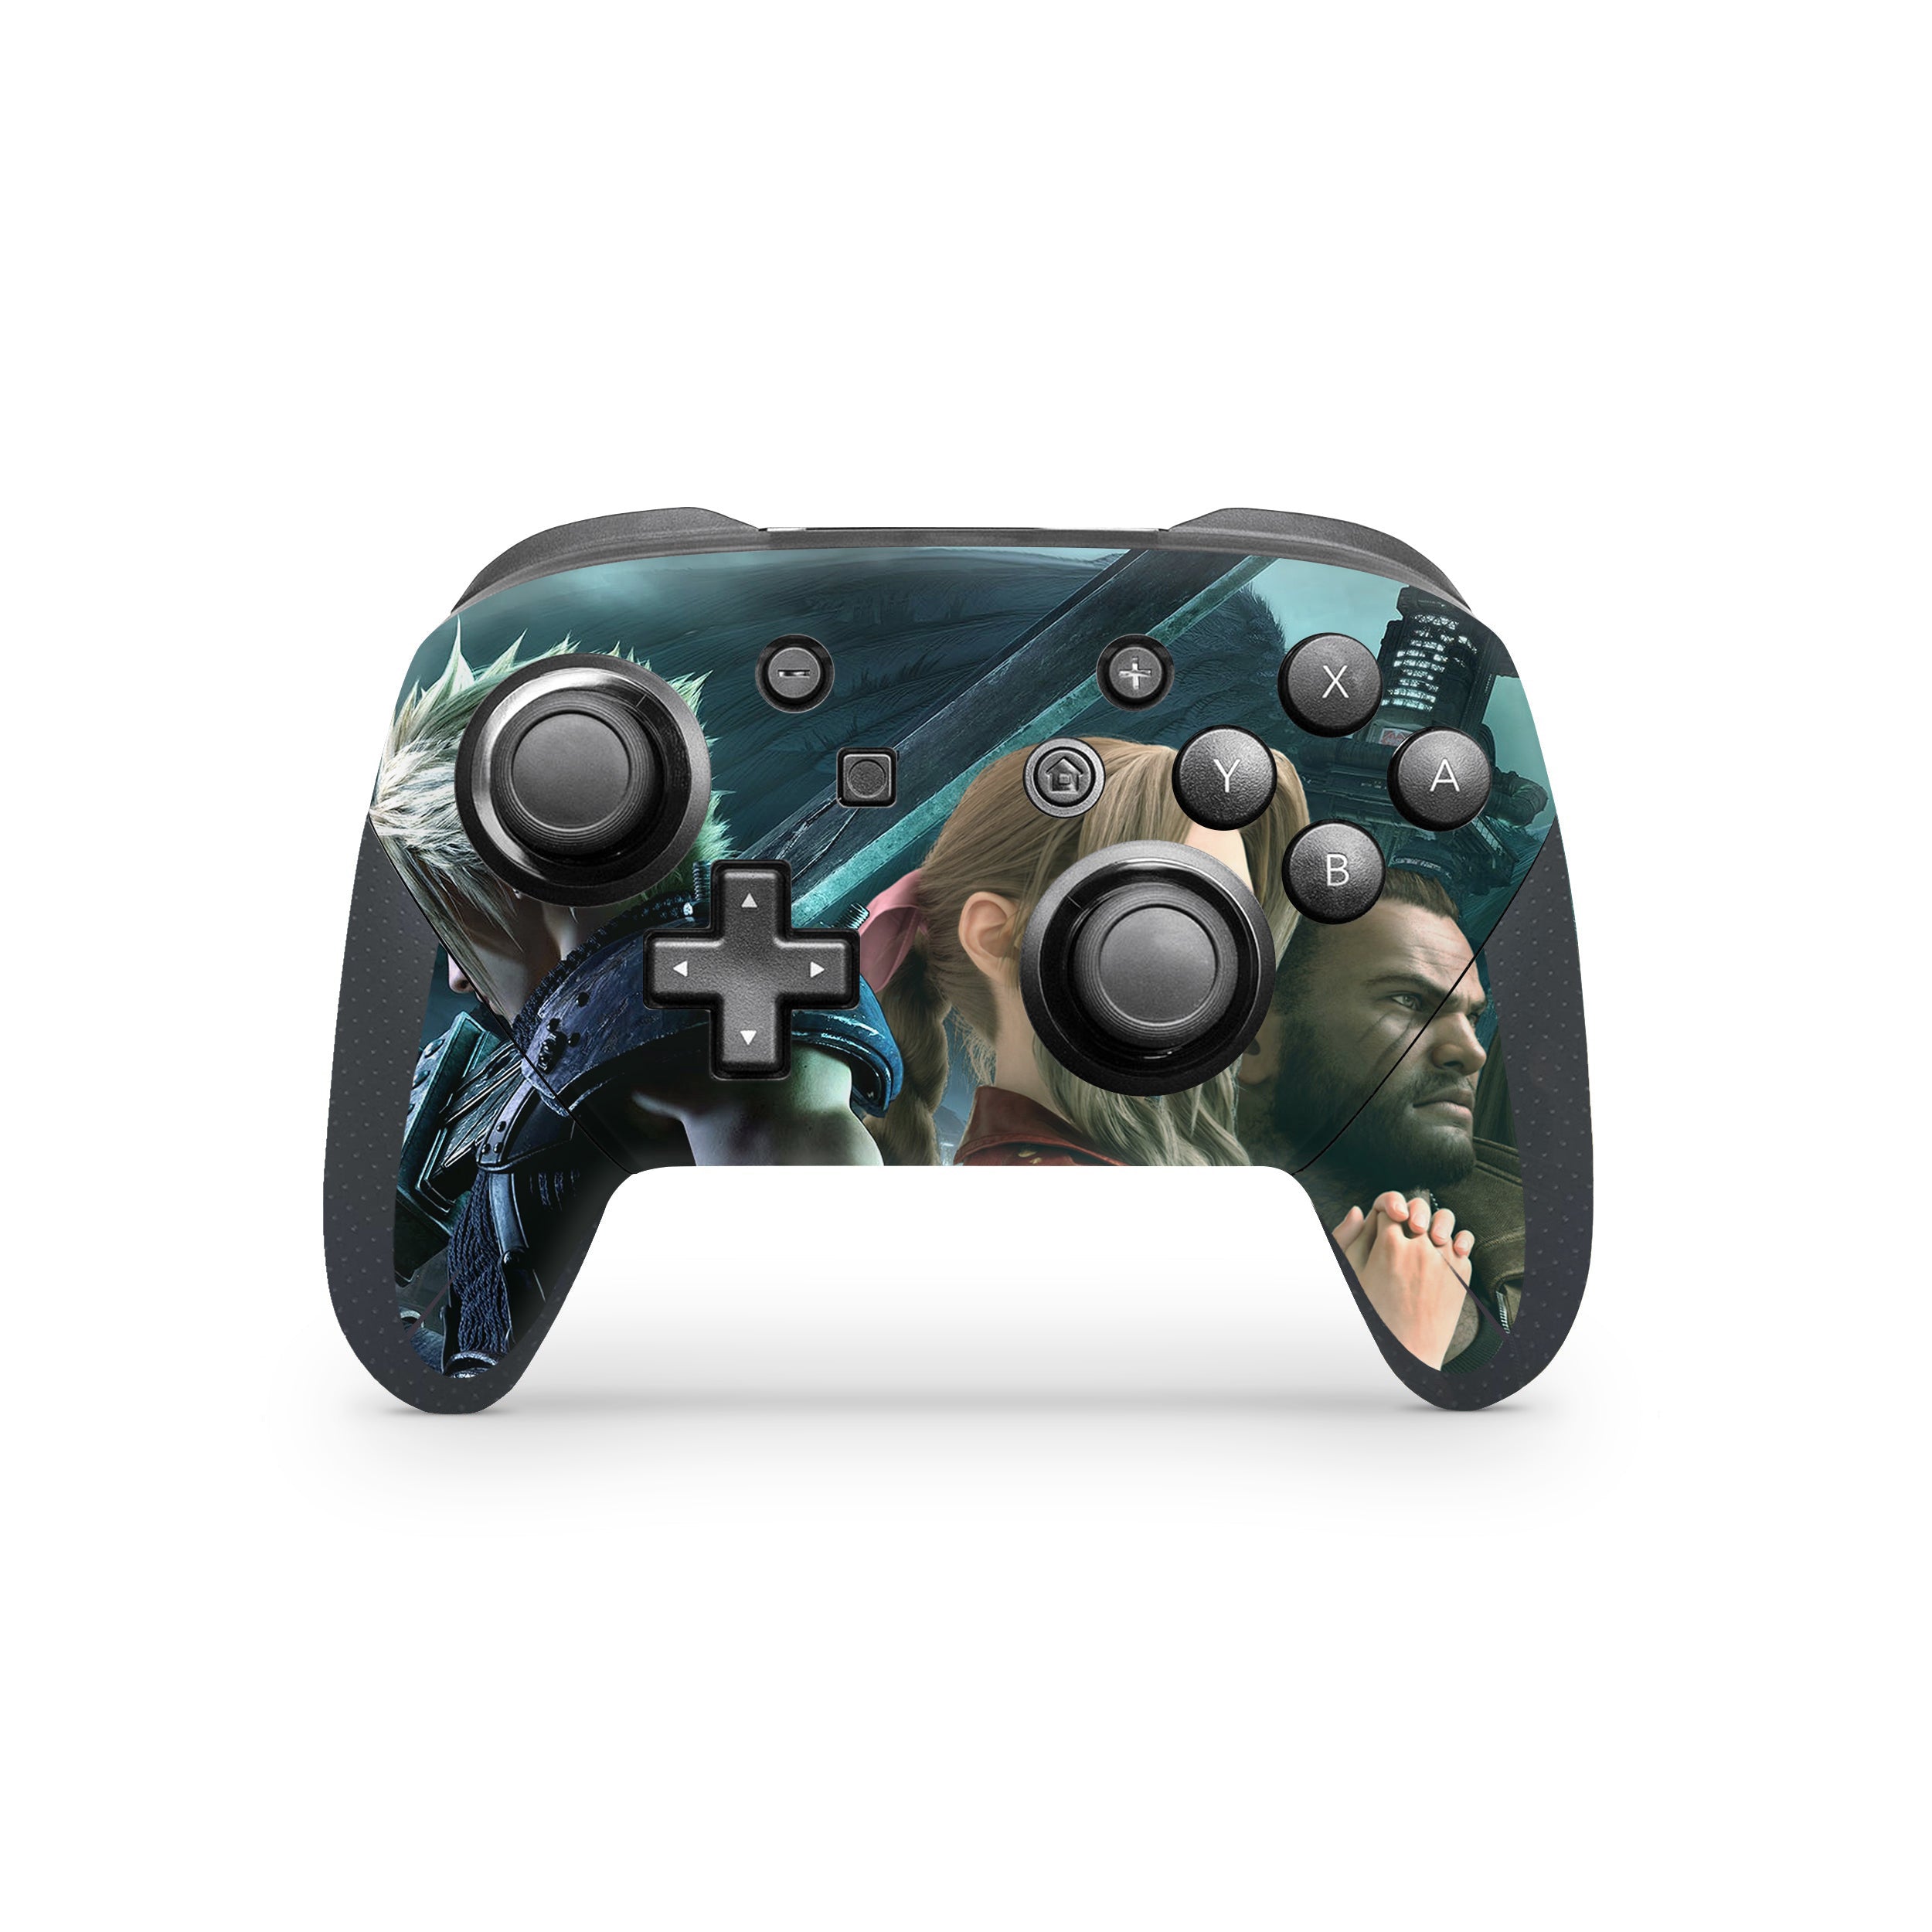 A video game skin featuring a Final Fantasy 7 Group design for the Switch Pro Controller.